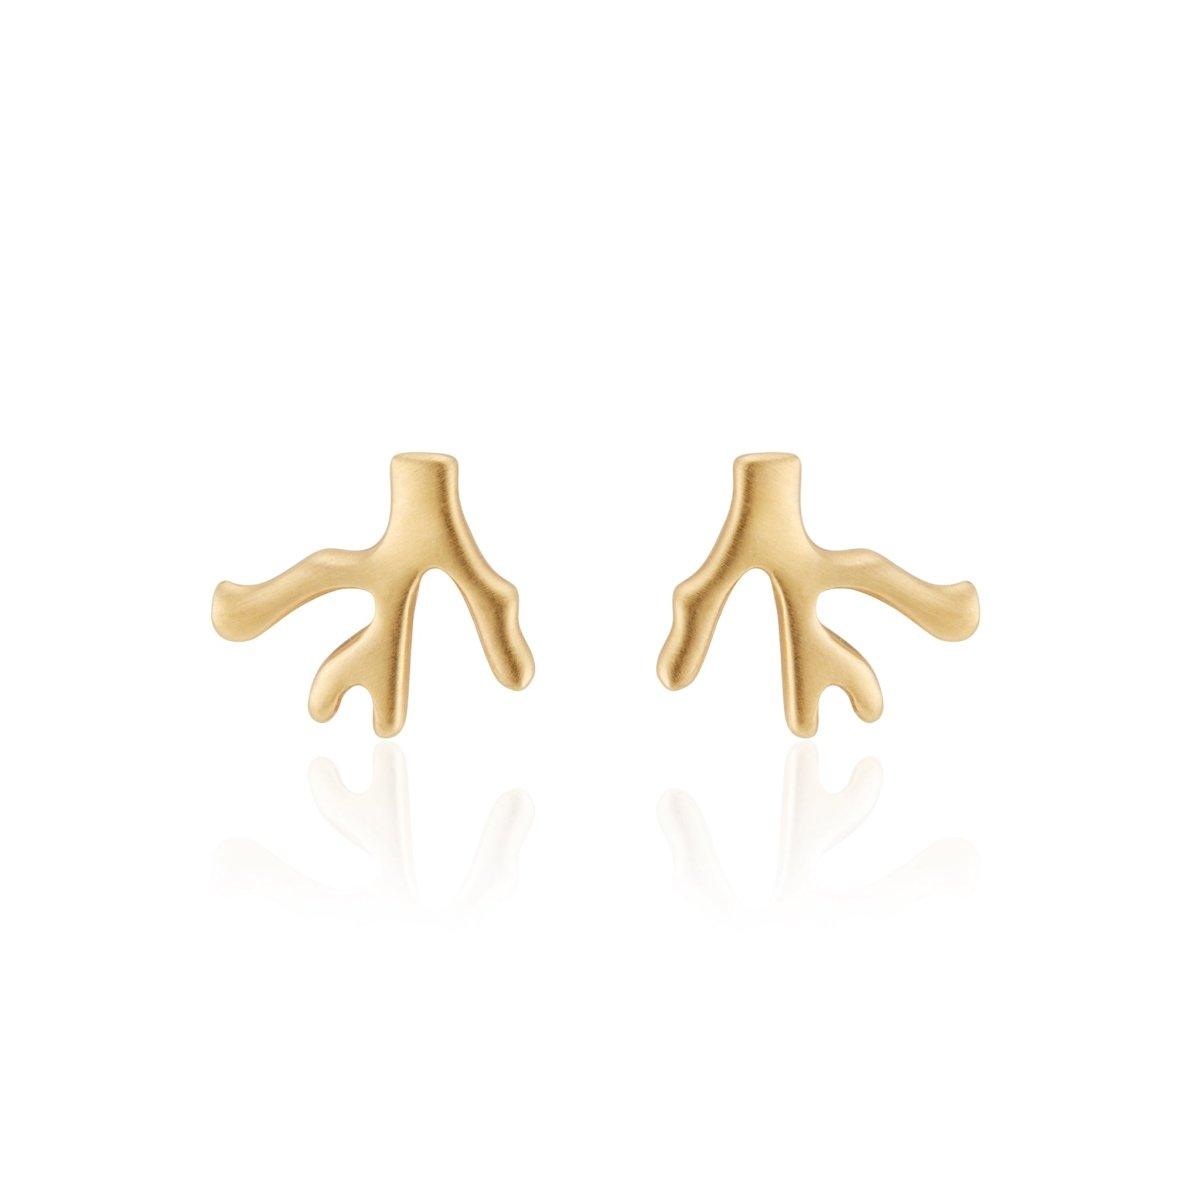 Gold Coral Stud Earrings - Nataly Aponte